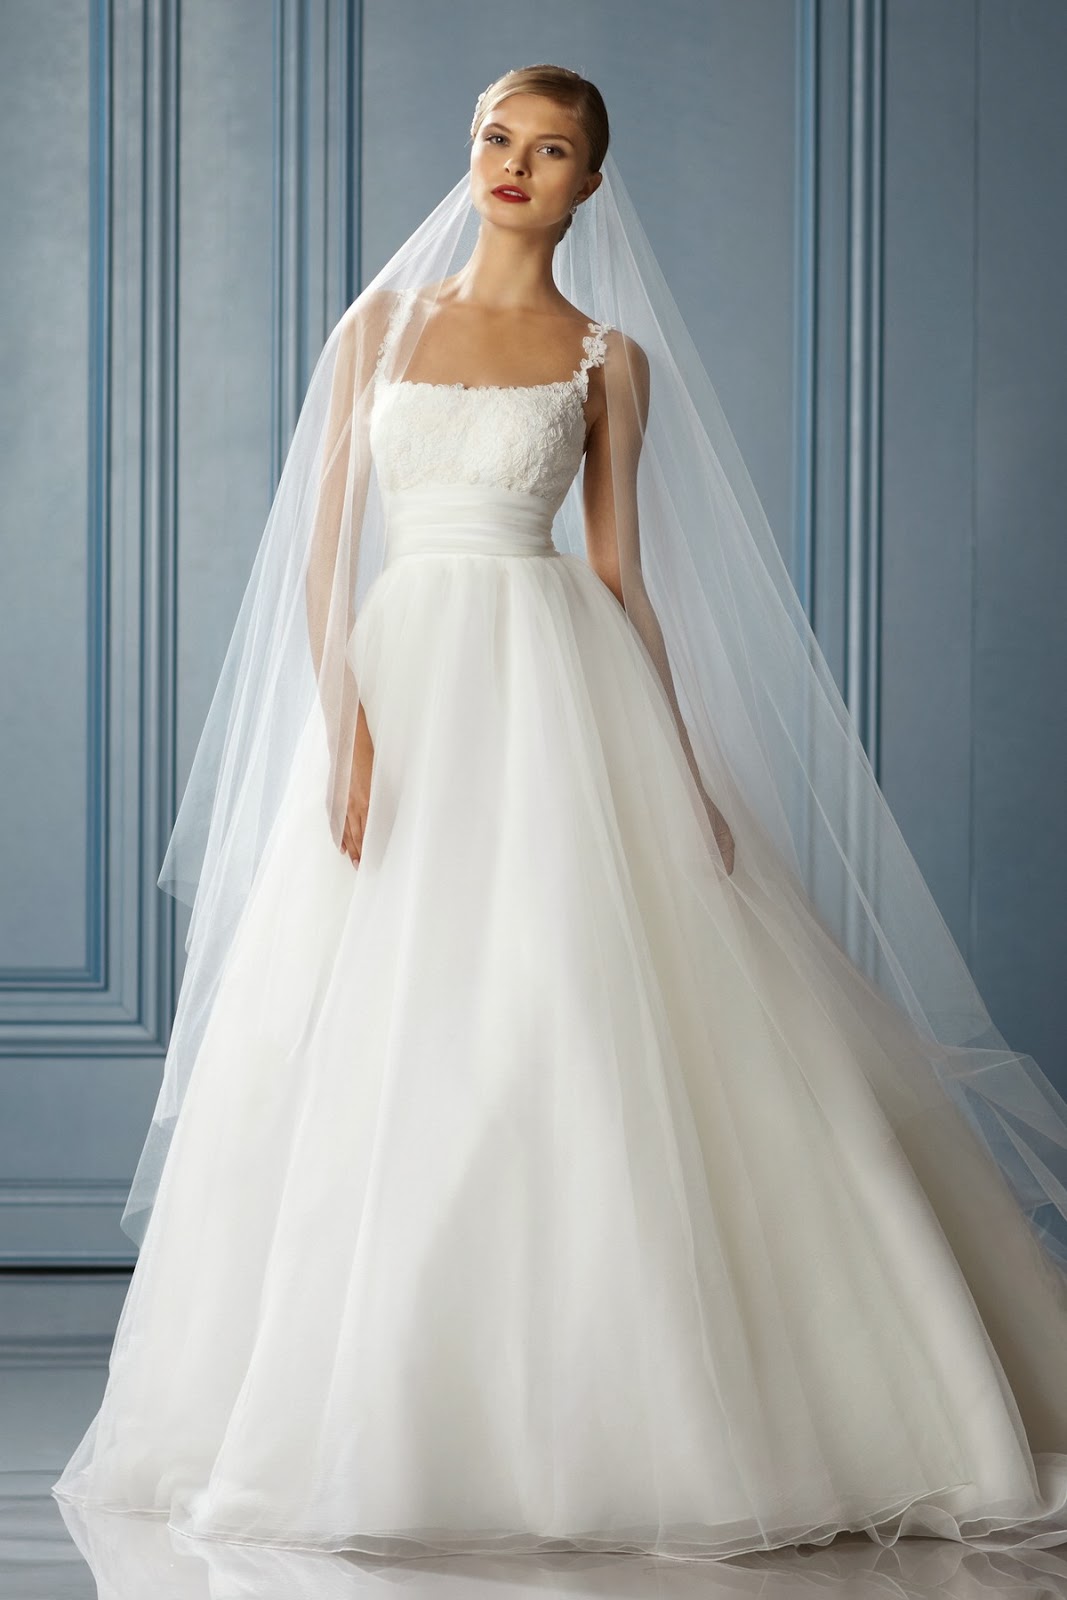 Link Camp: Wedding Dress Collection 2013 (22) - Expensive Dresses